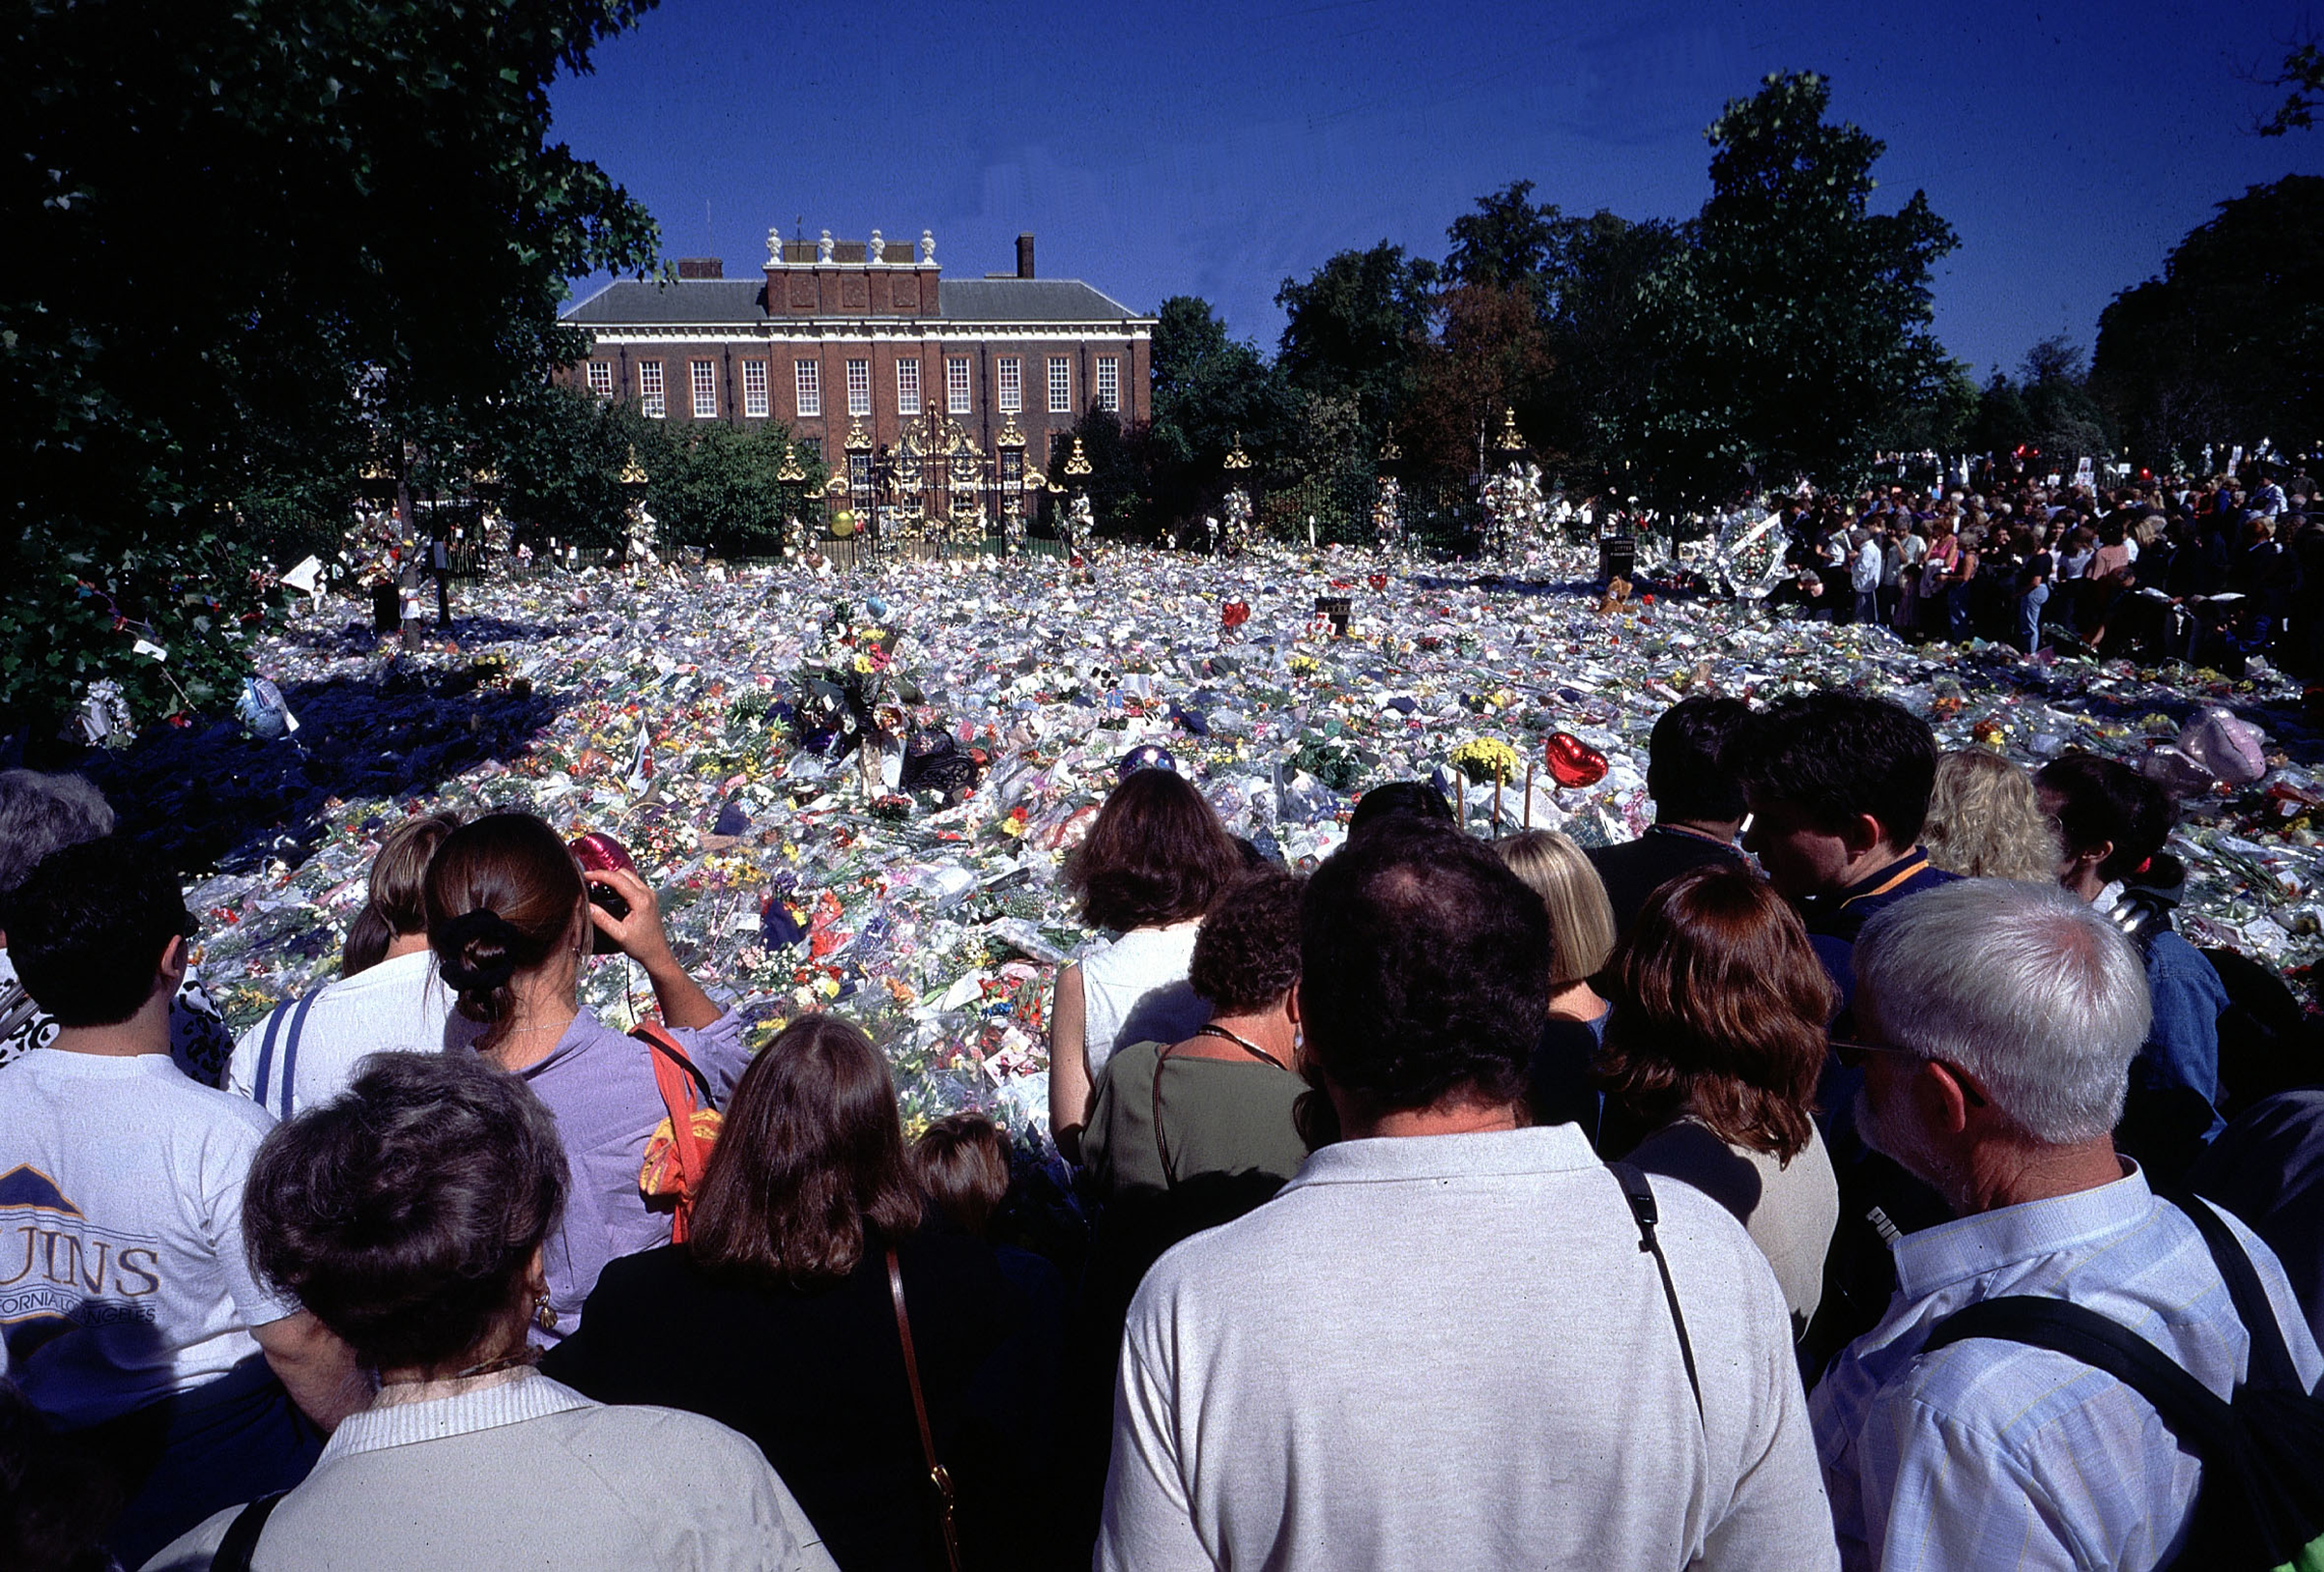 Kensington Palace mourners after the death of Diana, Princess of Wales. Jeff Overs—BBC/Getty Images (Jeff Overs—BBC/Getty Images)